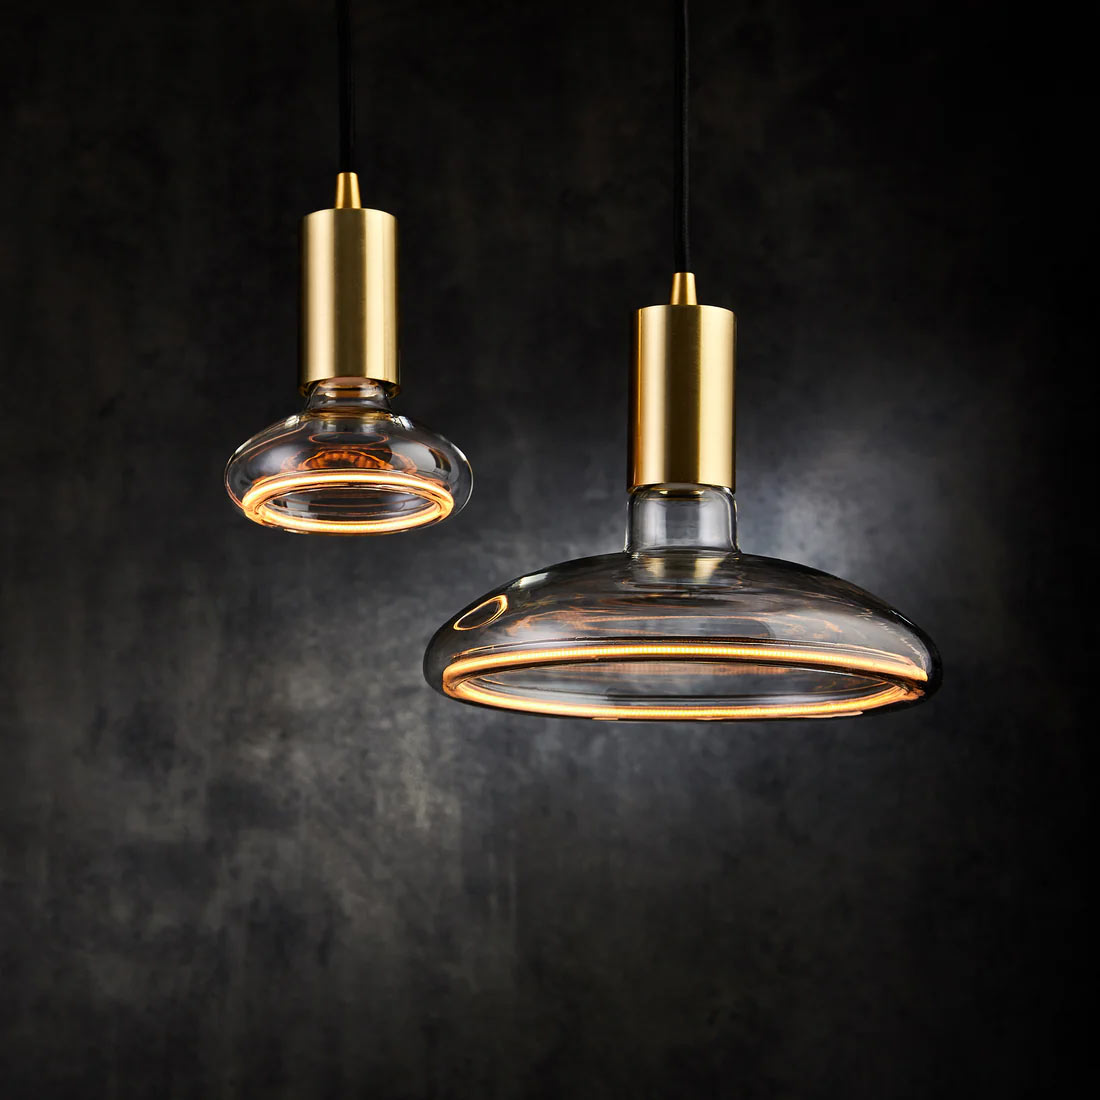 Well Lit Azure Orbit M200 Pendant Bulbs can be hung in pairs or in groups to create a real statement in your home and can be bought from South Charlotte Fine Lighting